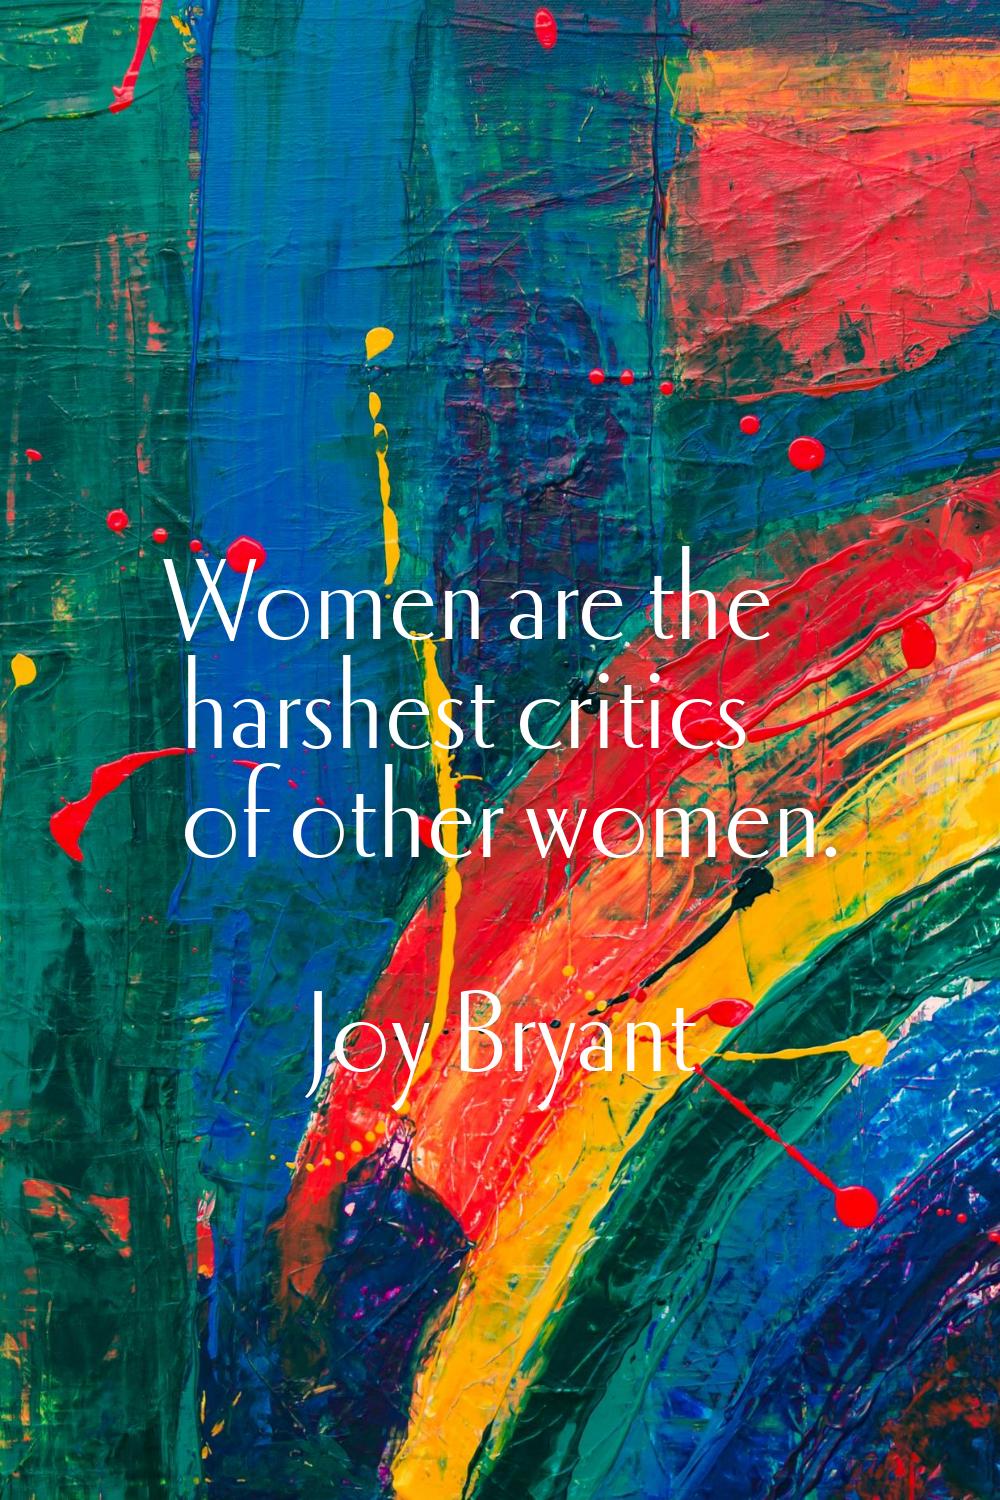 Women are the harshest critics of other women.